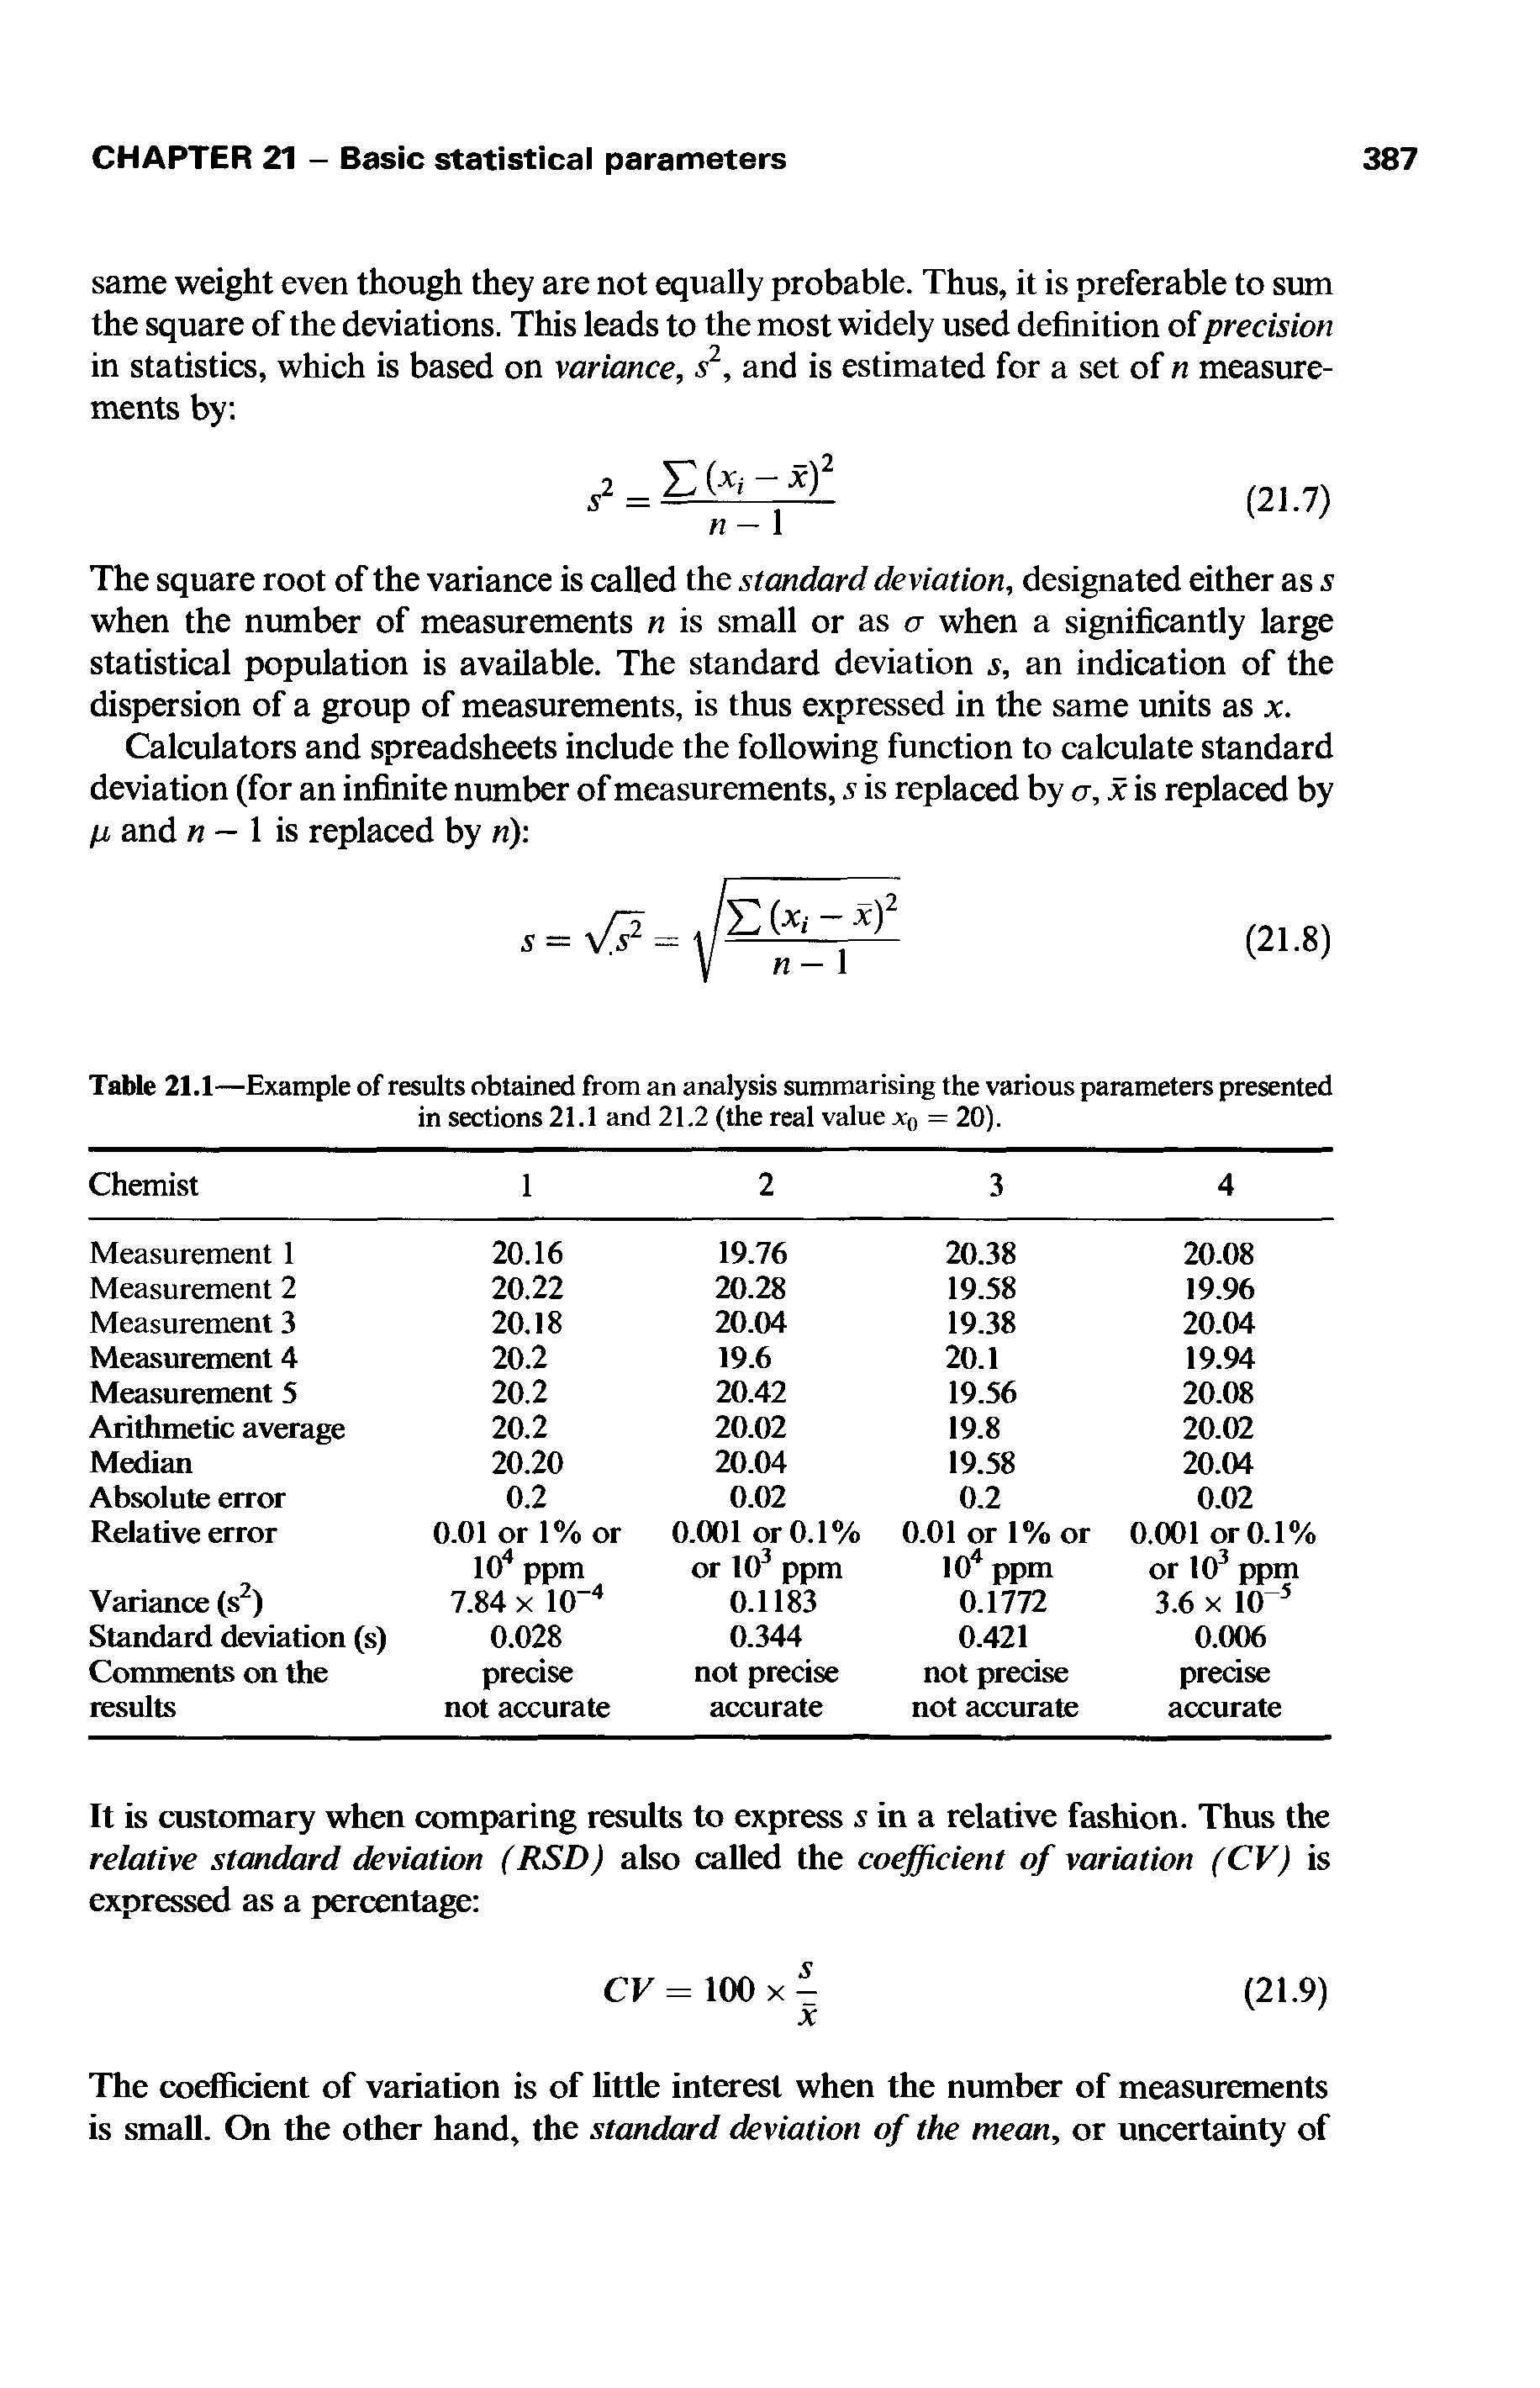 Table 21.1—Example of results obtained from an analysis summarising the various parameters presented in sections 21.1 and 21.2 (the real value x0 = 20).